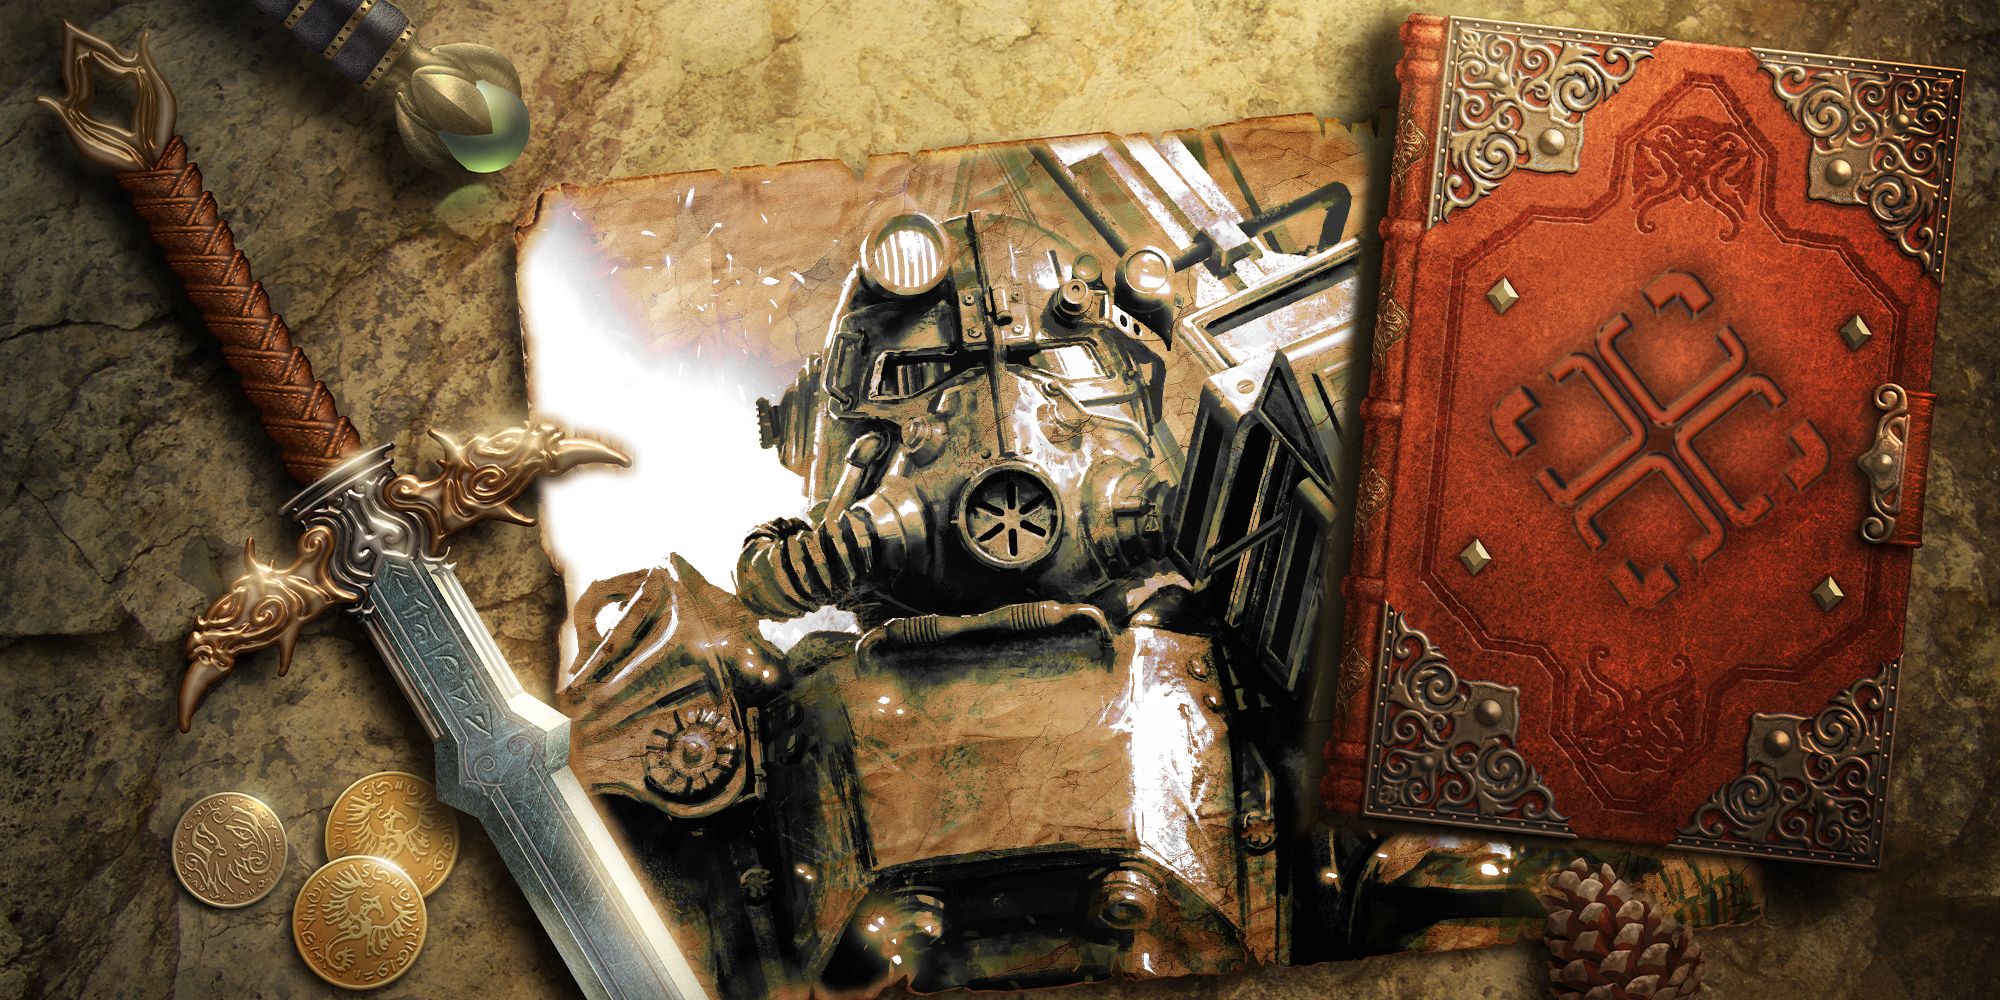 Power Armour from Fallout, as MTG card art, over old parchment next to a sword and book with metallic TheGamer logo on top